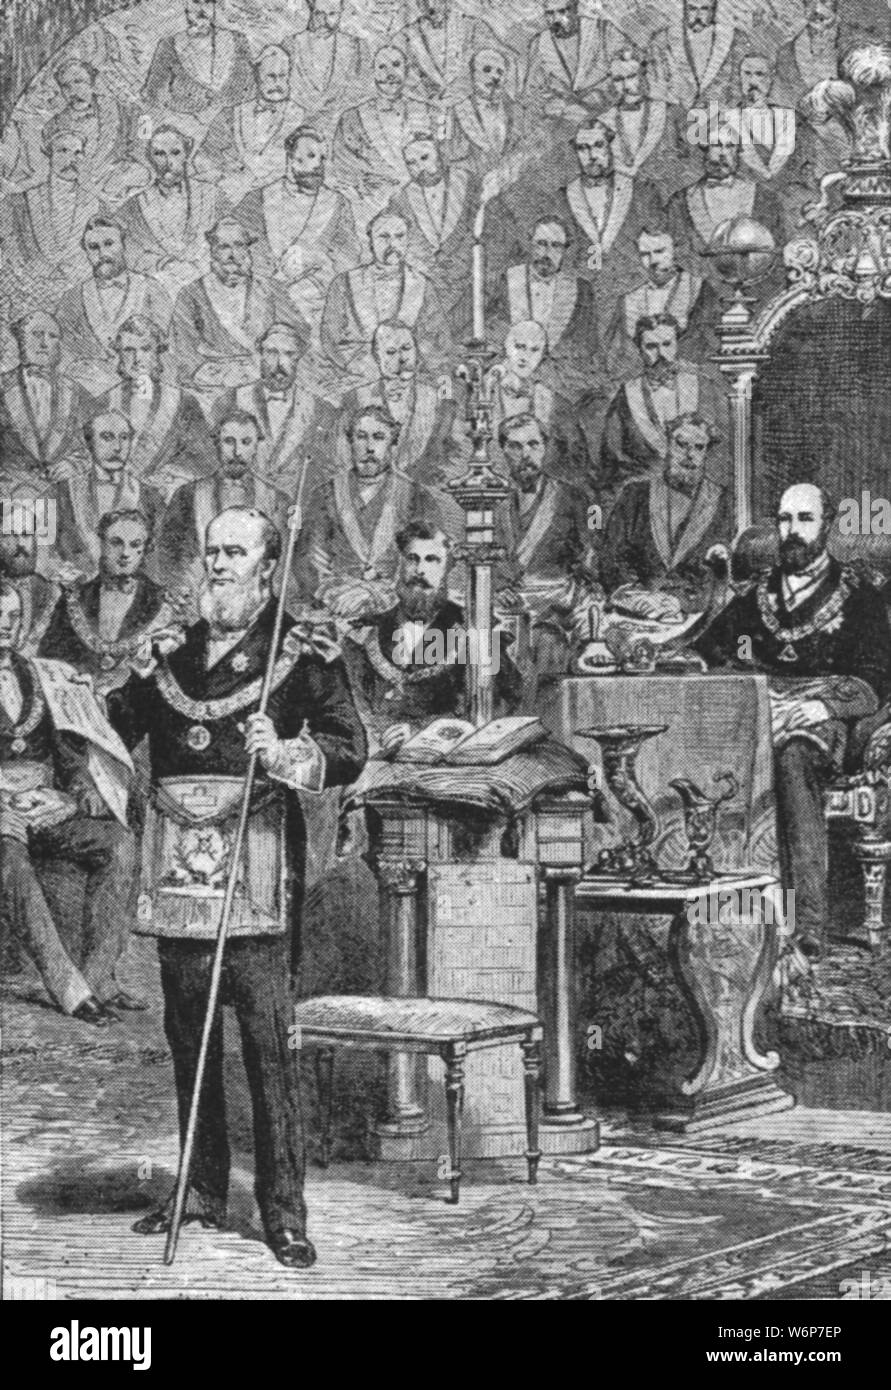 'The Prince of Wales' First Installation as Grand Master of the Freemasons, April 28, 1875', (1901). Prince Albert Edward (1841-1910 future King Edward VII, shown seated in the throne on the right), was Grand Master of the United Grand Lodge of England from 1874 until his accession to the throne in 1901. From &quot;The Illustrated London News Record of the Glorious Reign of Queen Victoria 1837-1901: The Life and Accession of King Edward VII. and the Life of Queen Alexandra&quot;. [London, 1901] Stock Photo